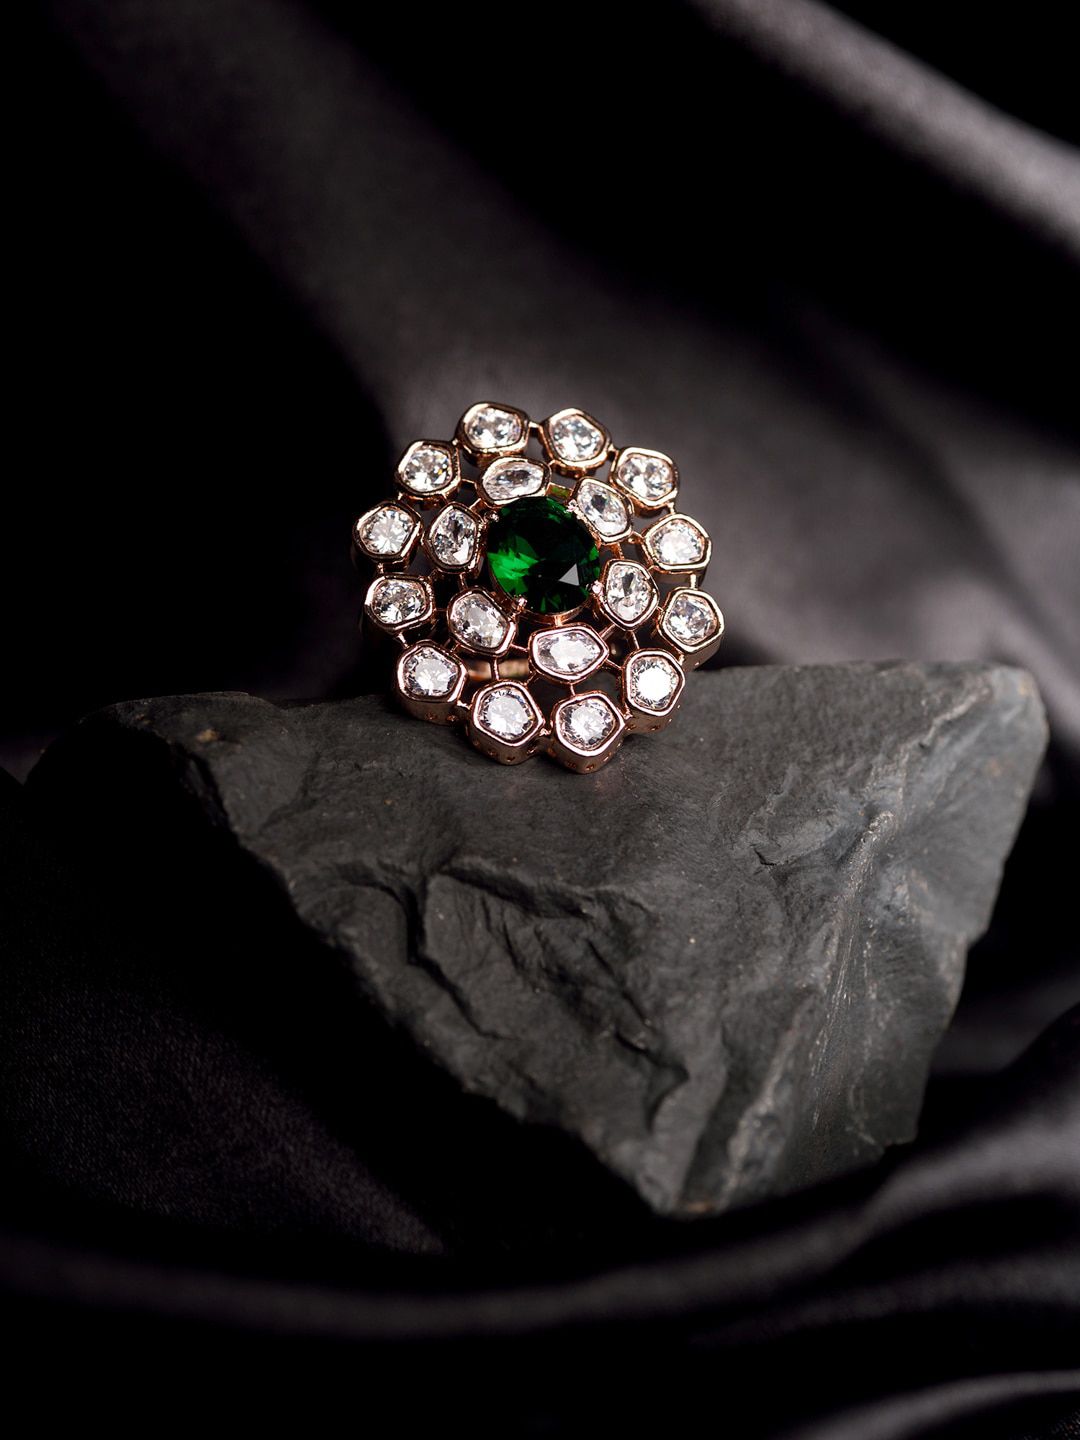 Saraf RS Jewellery Gold-Plated White & Emerald Green American Diamond Studded Handcrafted Finger Ring Price in India